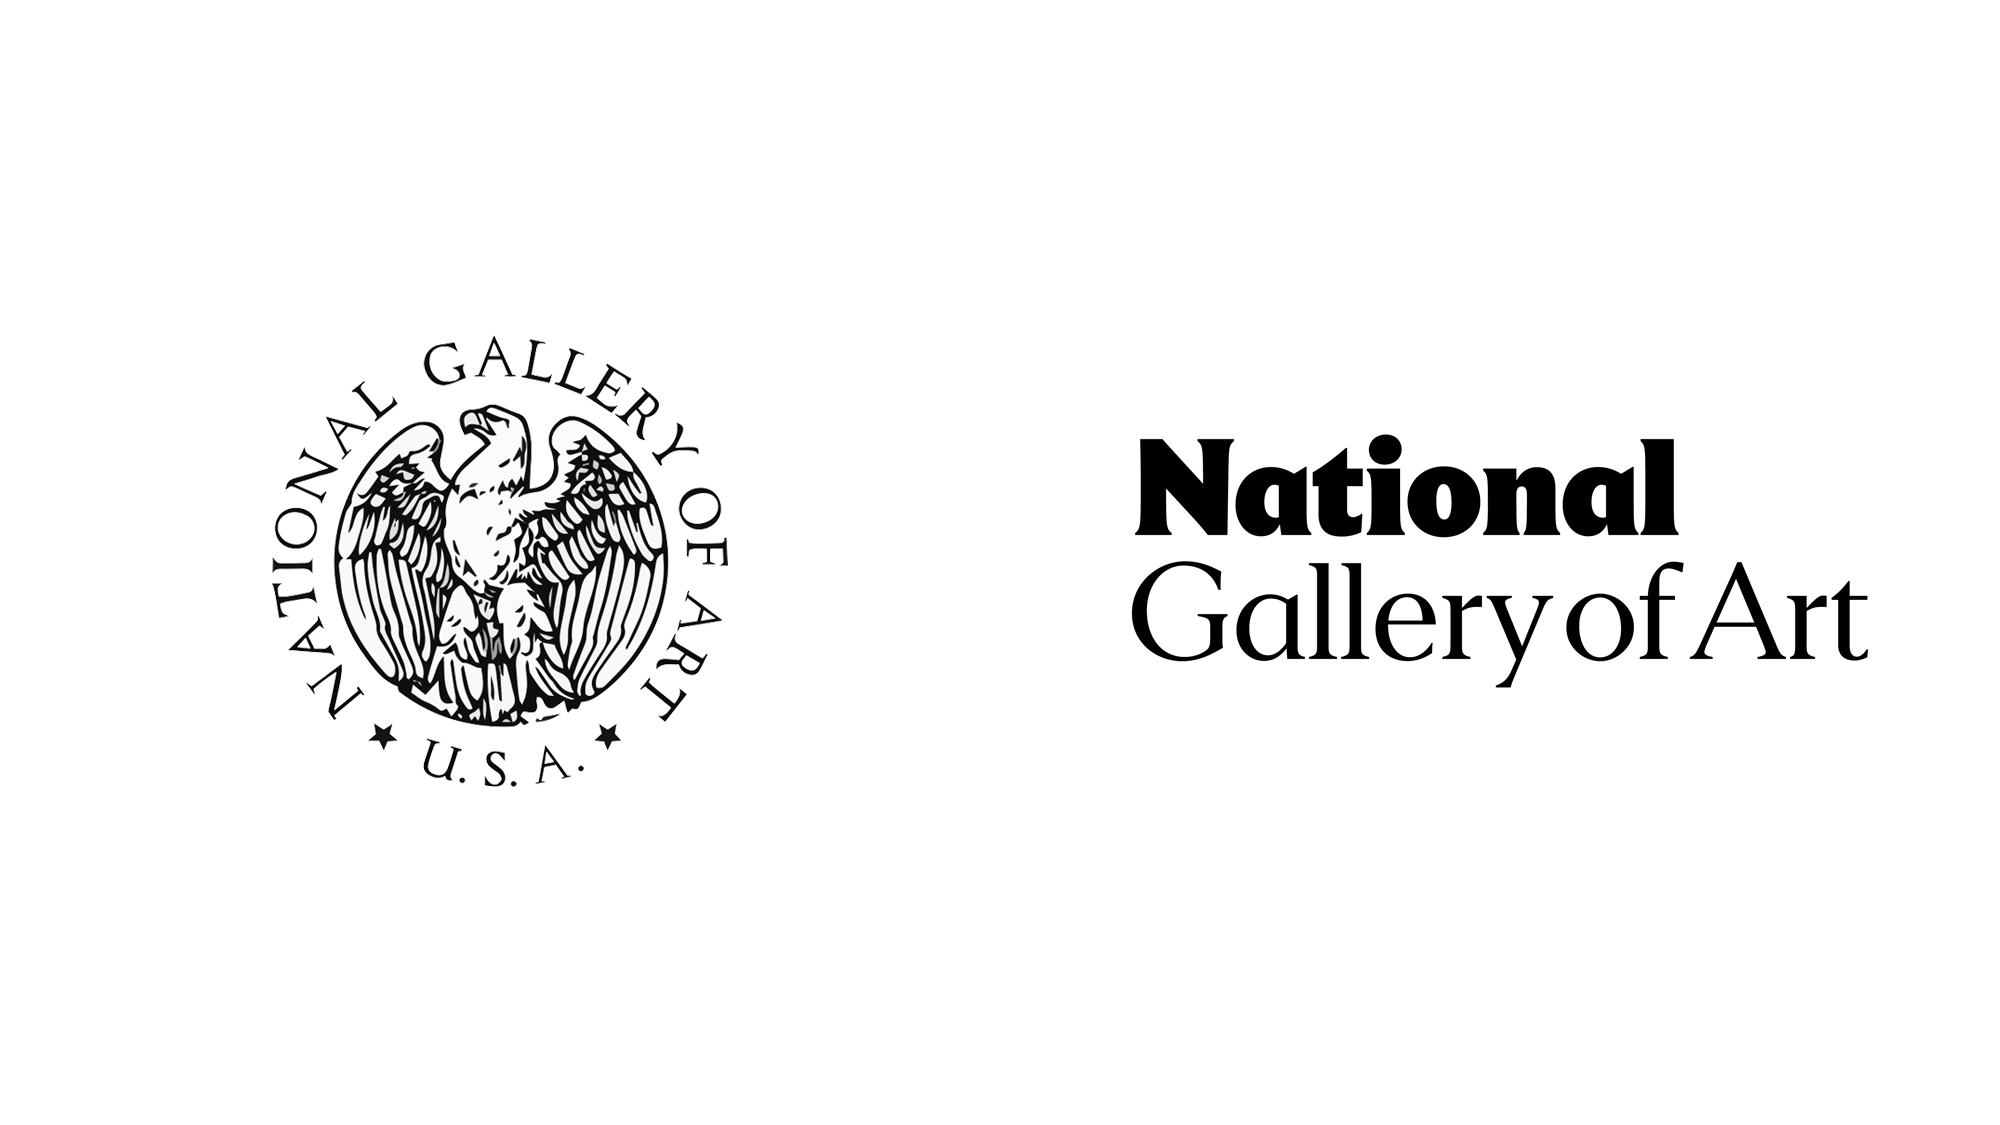 Brand New: New Logo and Identity for National Gallery of Art by Pentagram